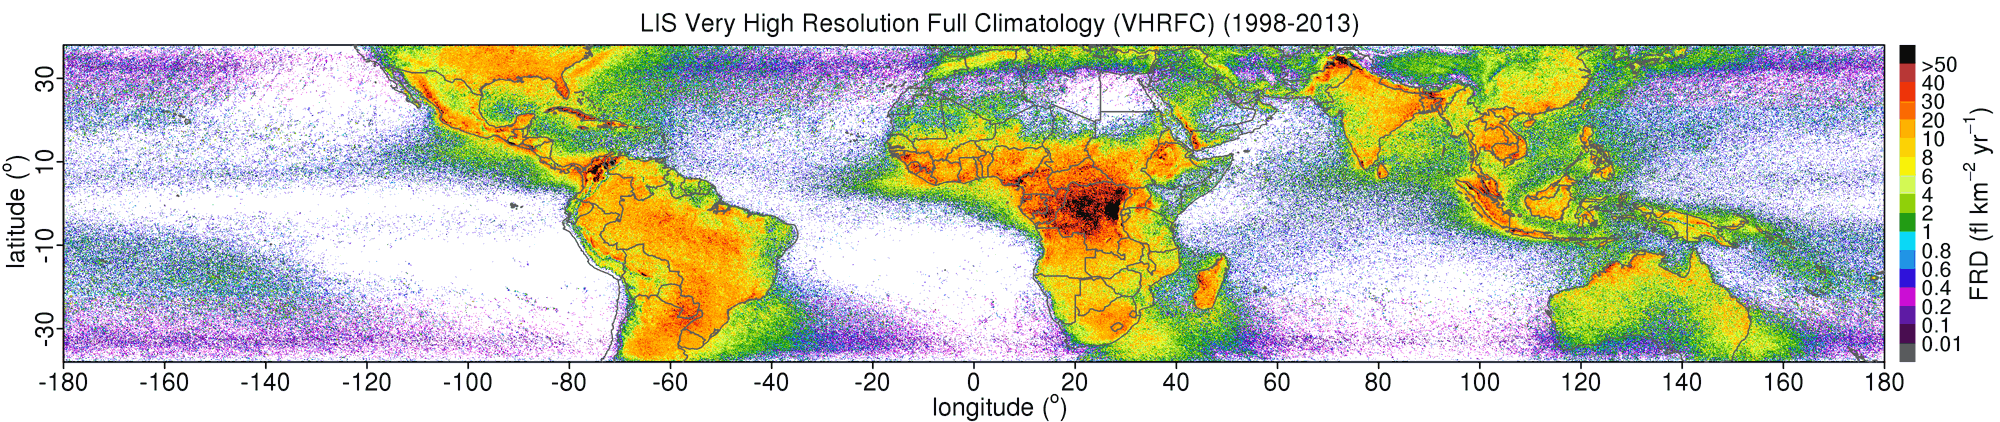 LIS Very High Resolution Full Climatology